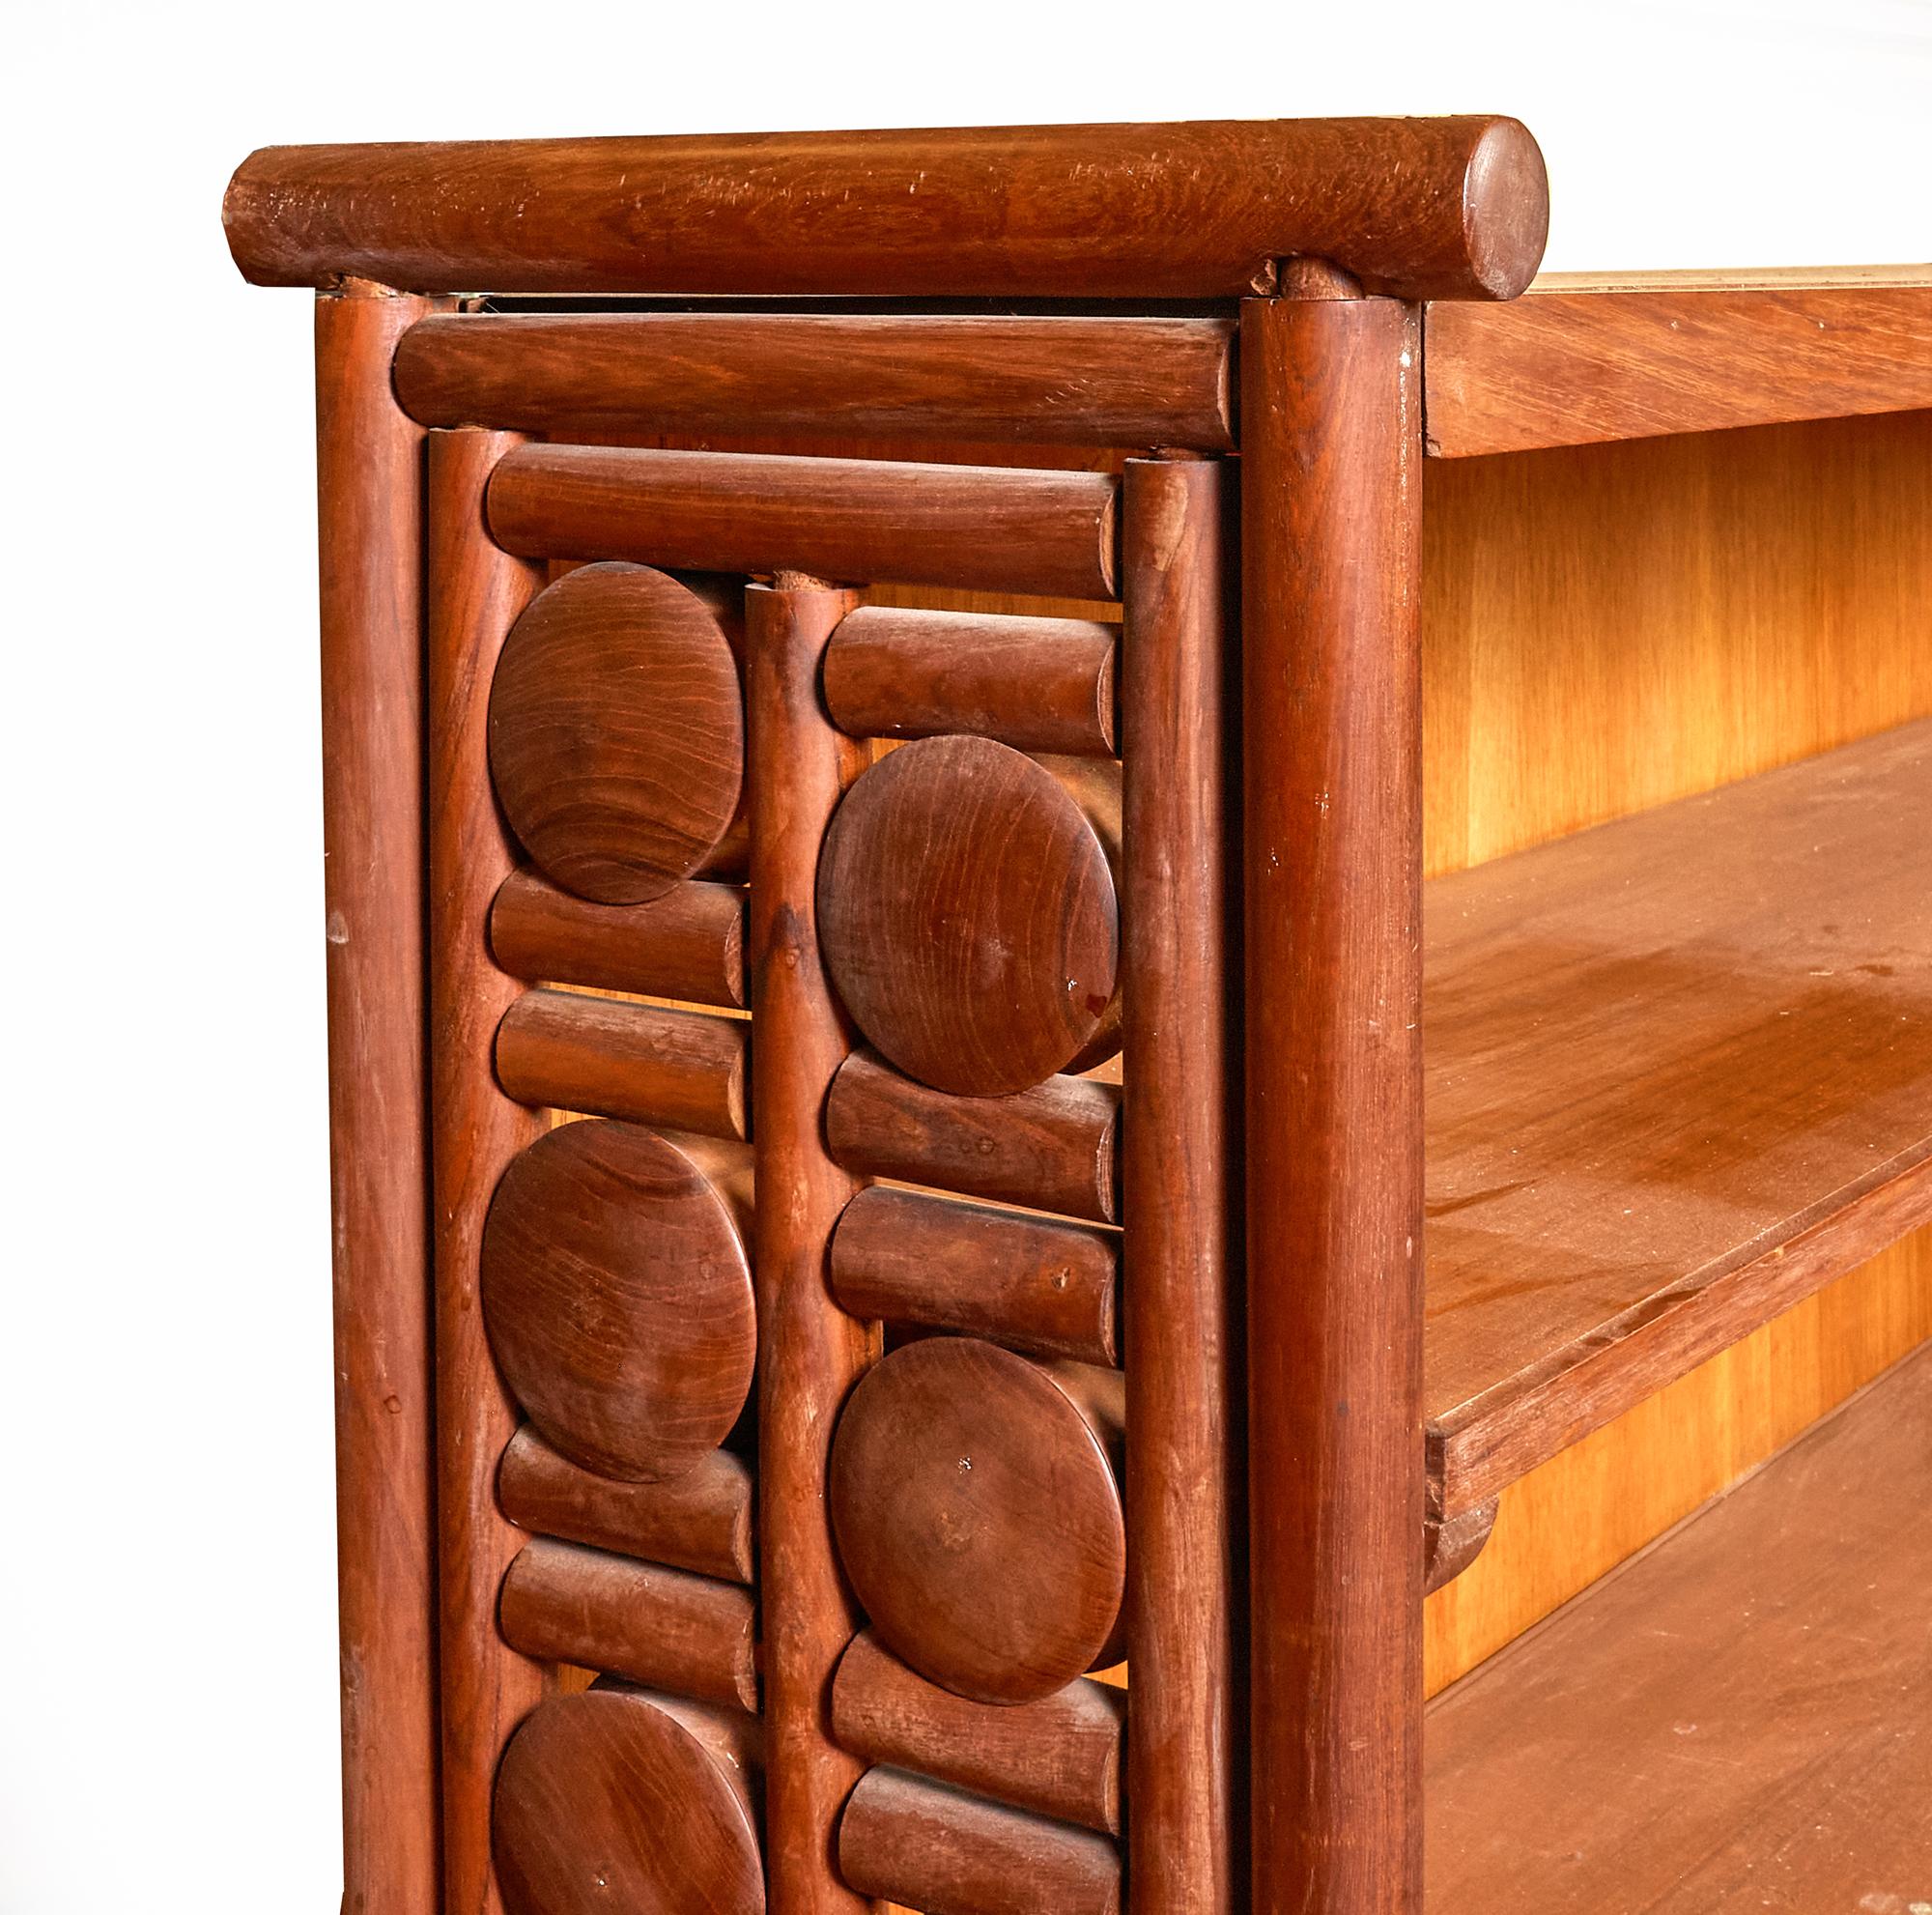 Rare and unique handcrafted solid teak Mid-Century Modern book case with floating disk design. The intricately designed sides are a series of teak disks and bars which allows the disks to turn freely while being held in place without nails. This